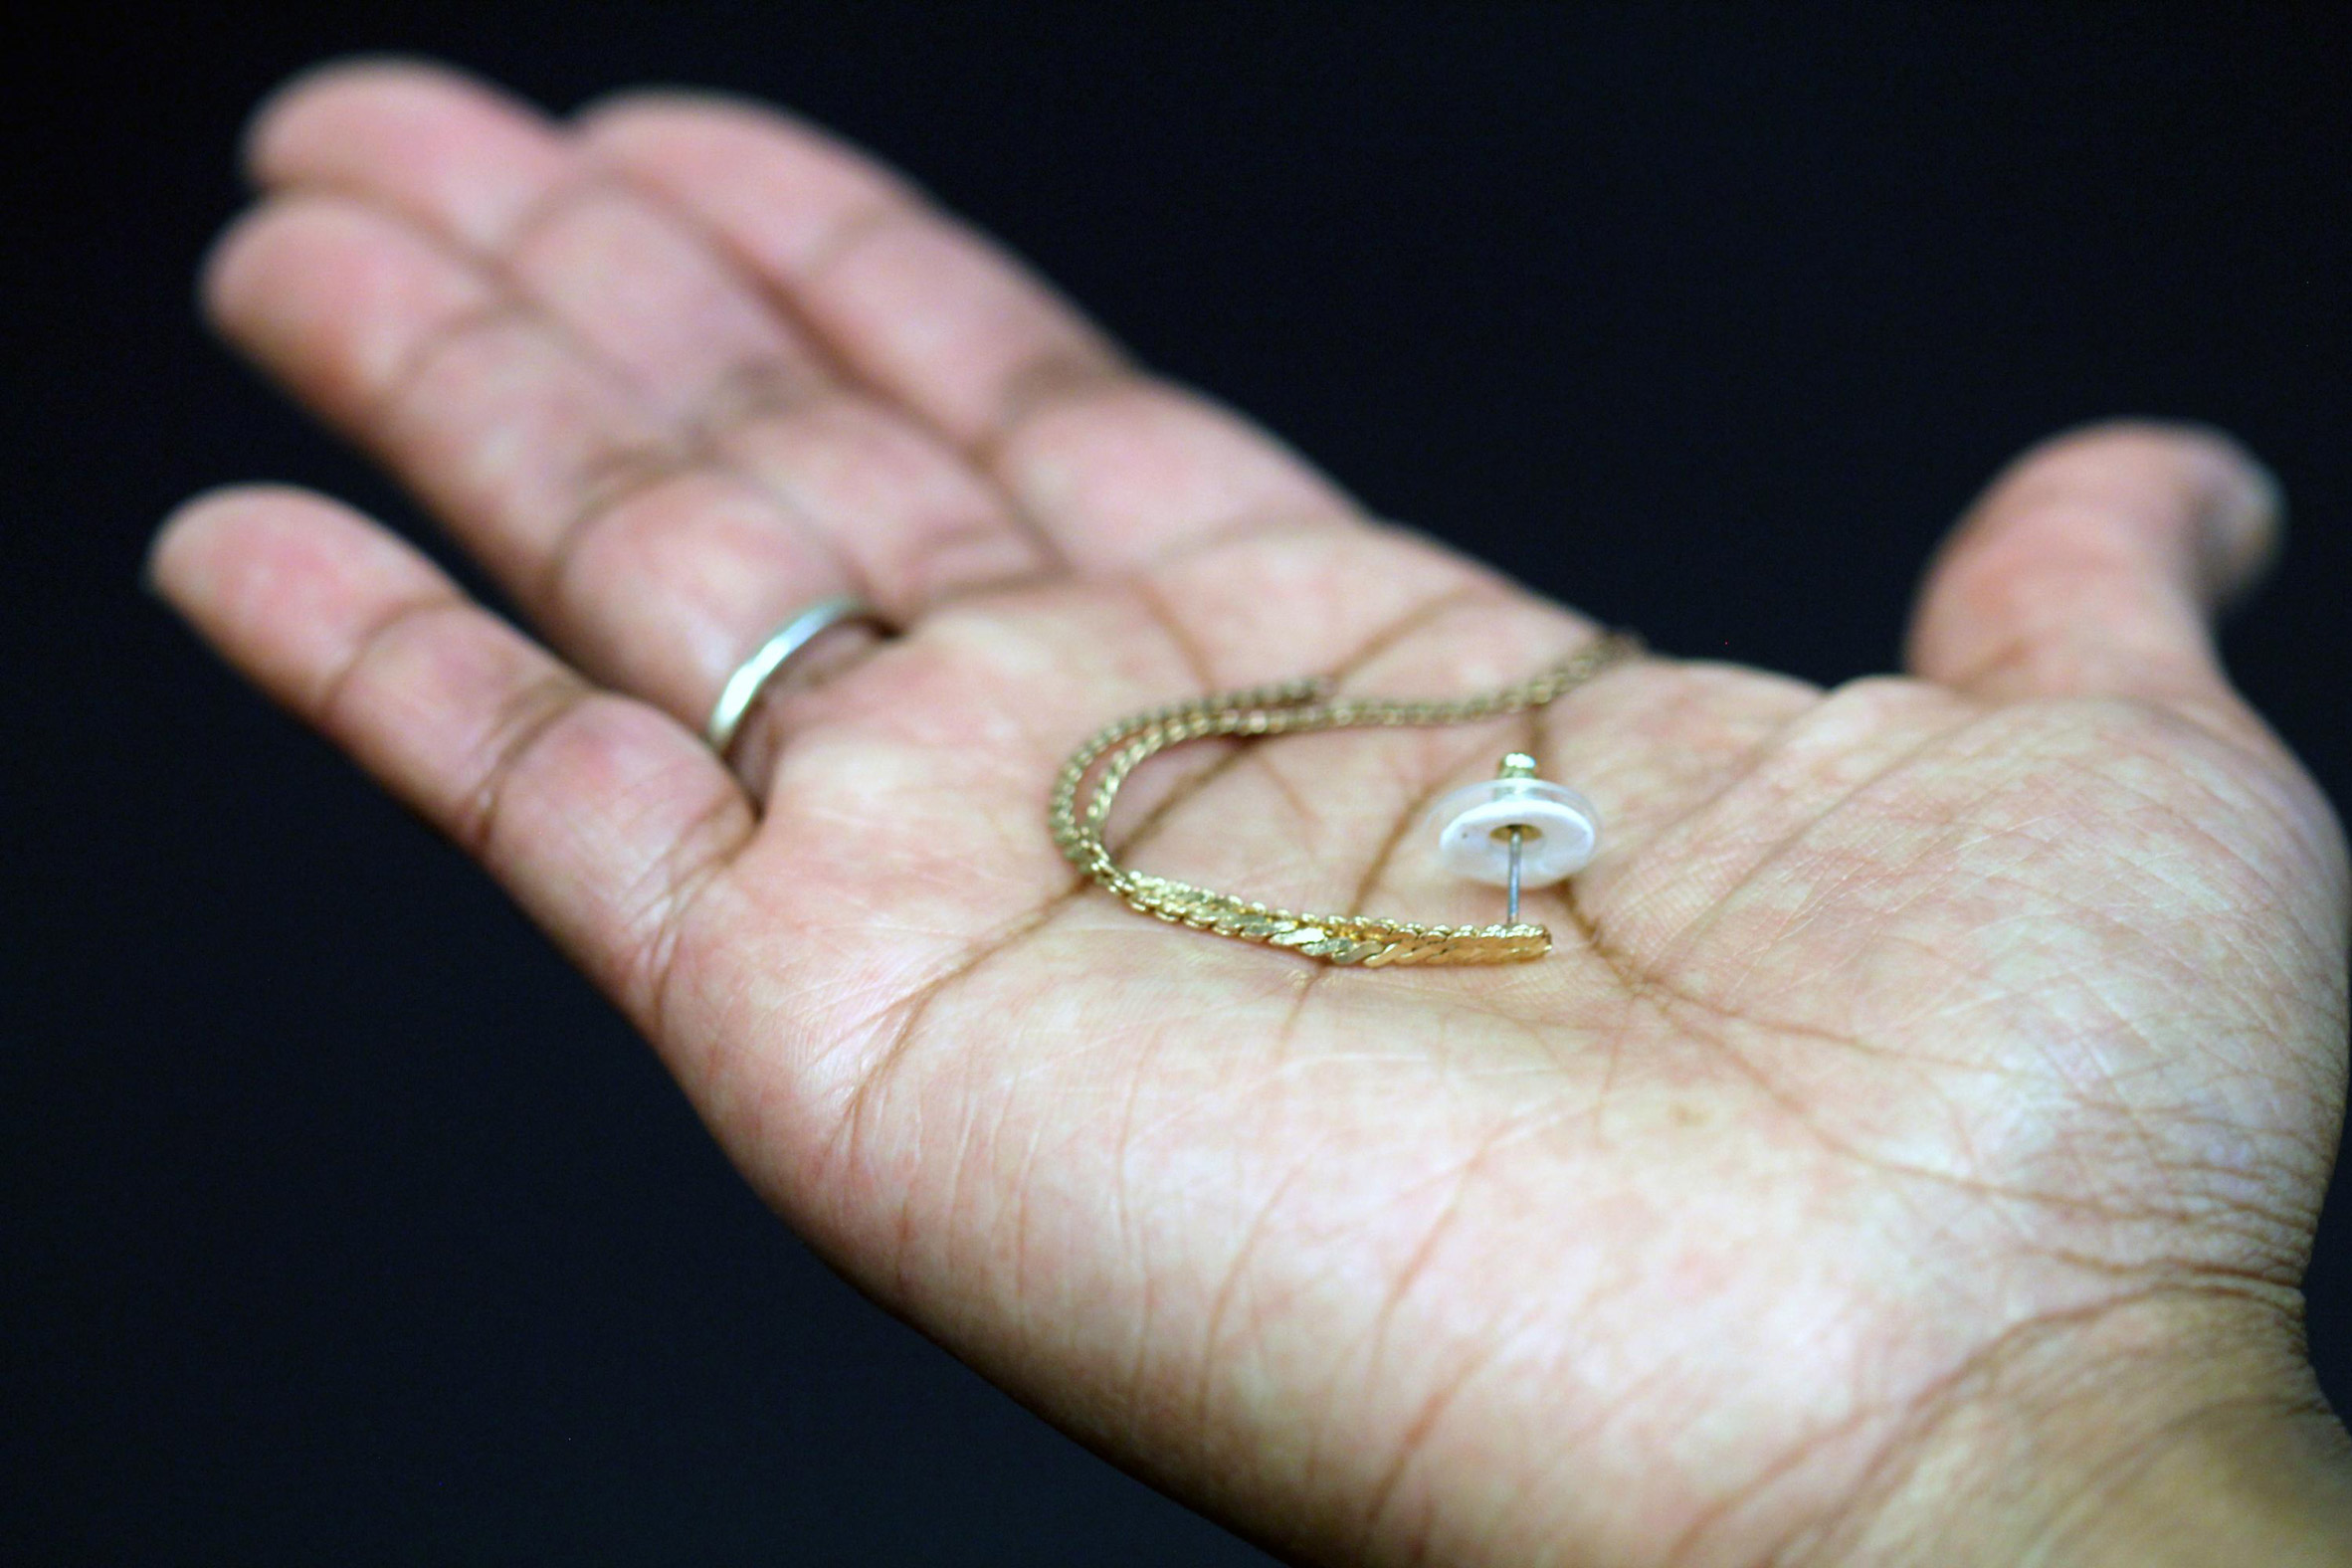 Contraceptive jewellery by Georgia Institute of Technology